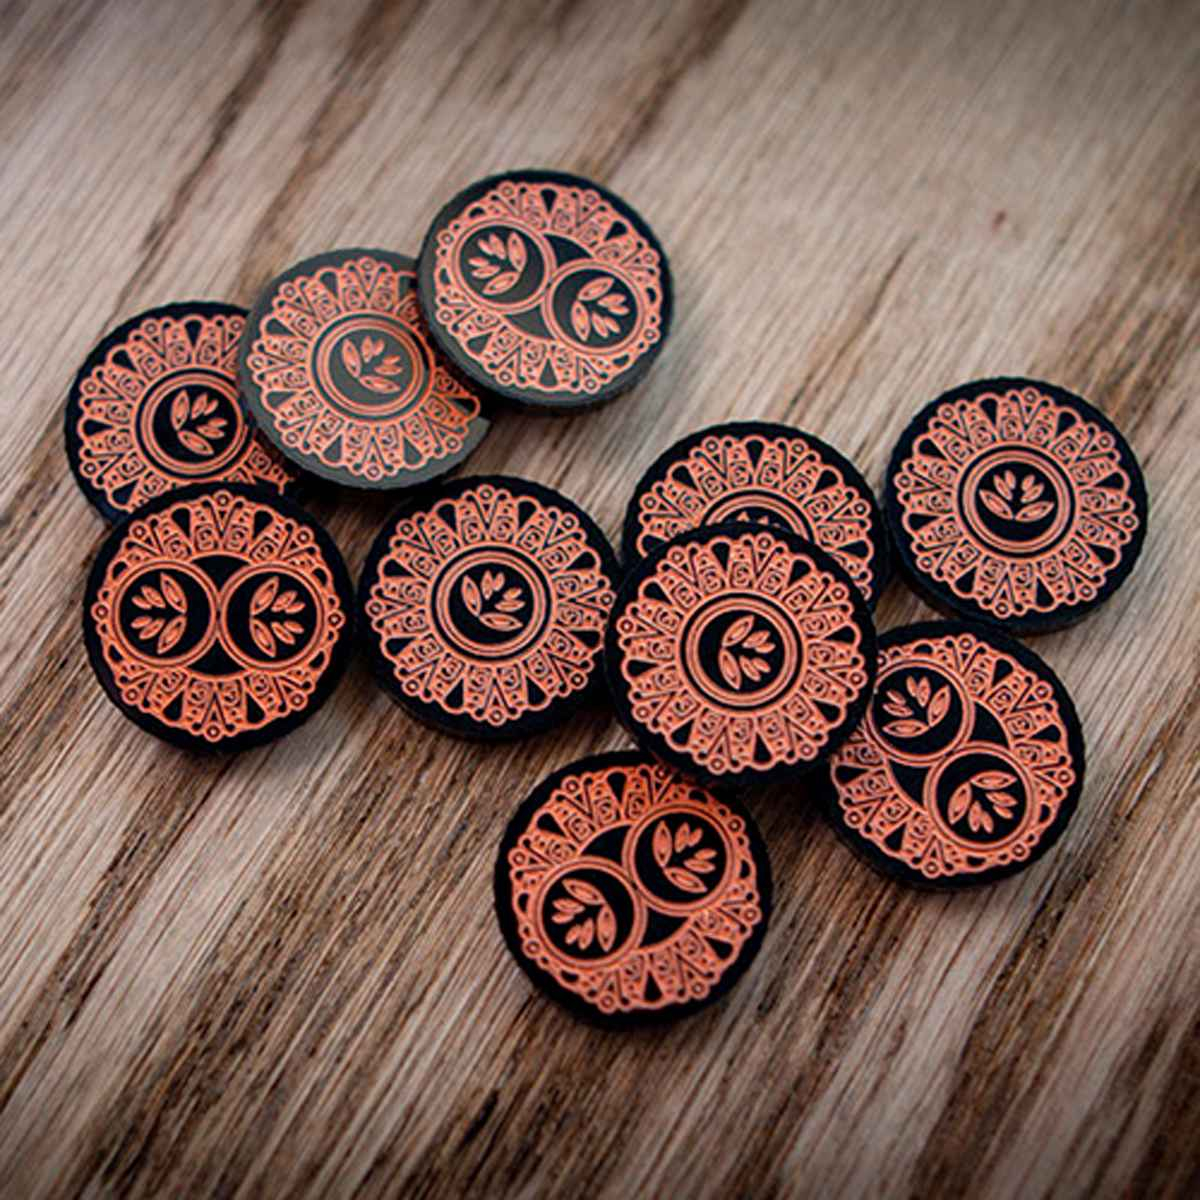 A jumble of Forgotten Limited Edition Doom tokens displaying the one-value and two-value side on top of a wooden table